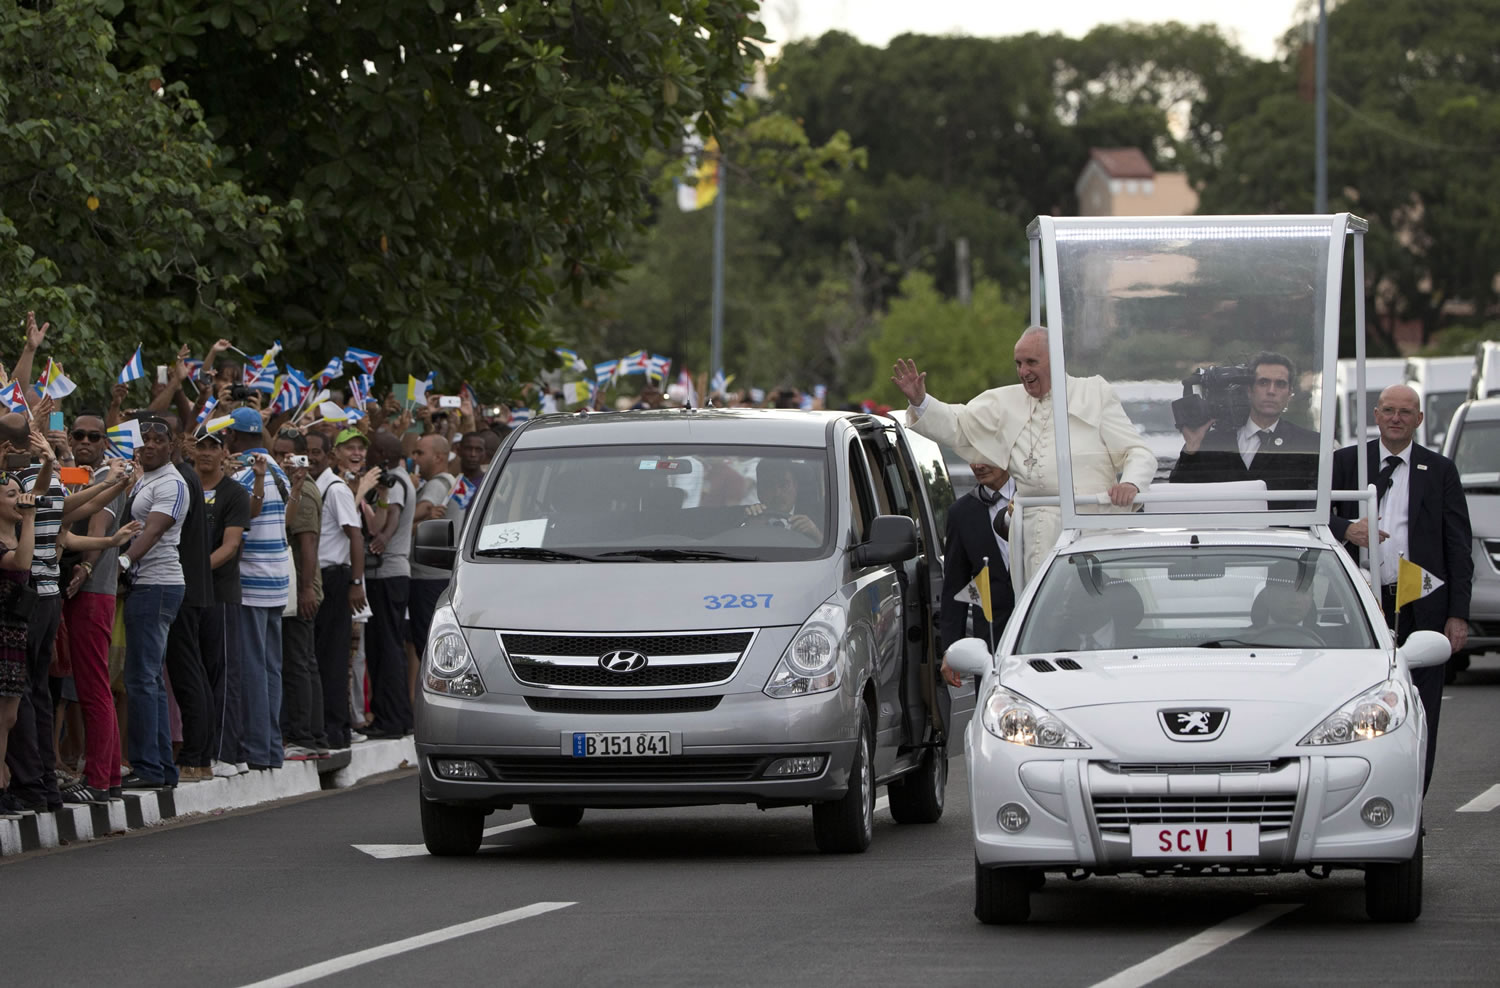 Pope Francis waves to people from his popemobile as he arrives to the Apostolic Nunciature in Havana, Cuba, Saturday, Sept. 19, 2015. Pope Francis began a 10-day trip to Cuba and the United States, embarking on his first trip to the onetime Cold War foes after helping to nudge forward their historic rapprochement.